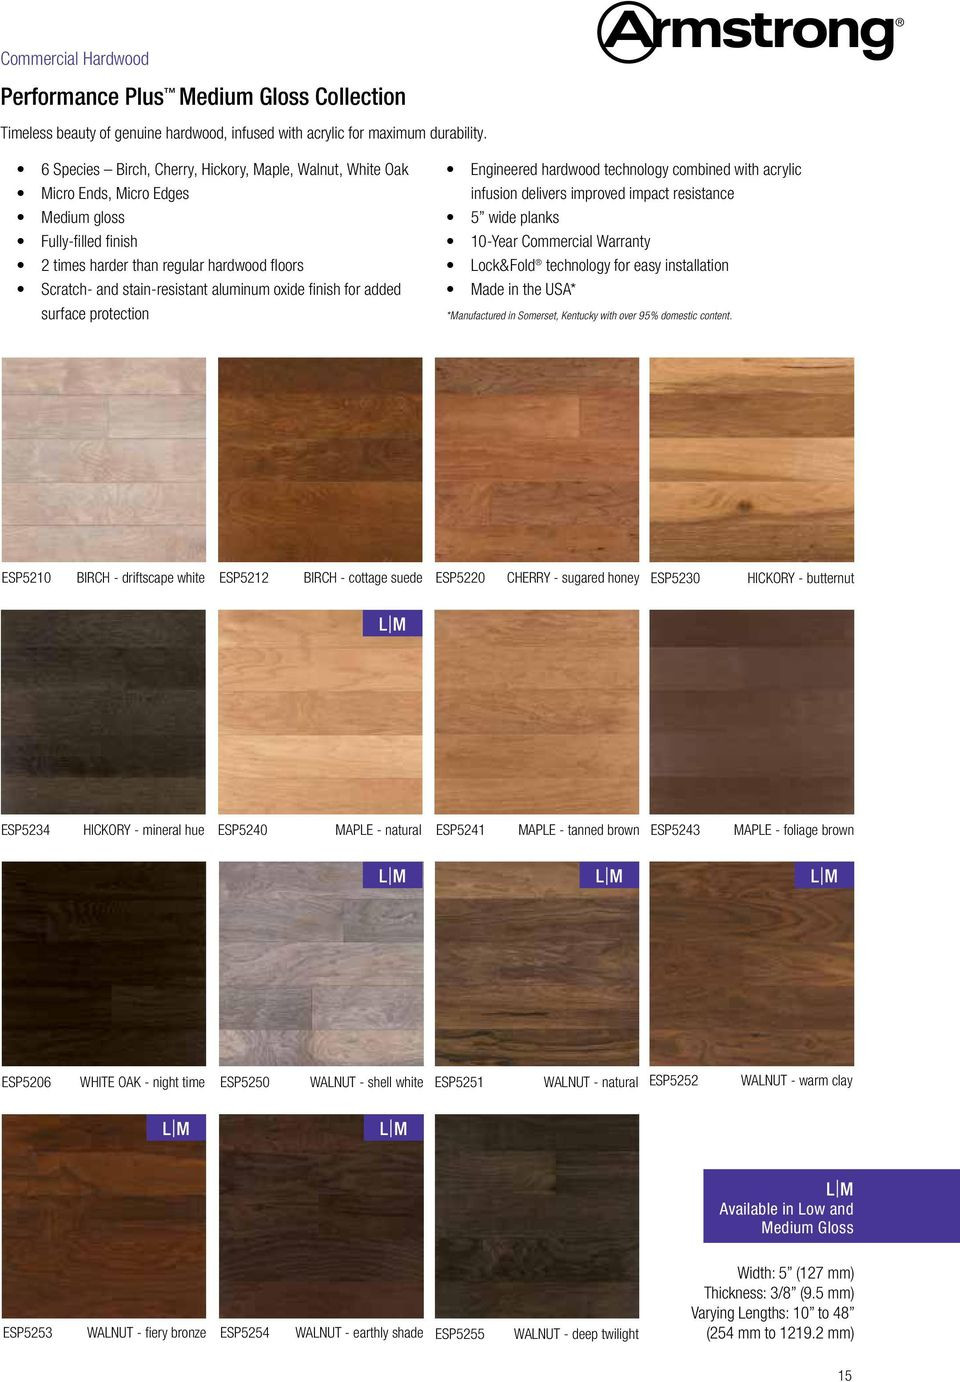 30 Popular Hardness Of Hardwood Flooring Types 2022 free download hardness of hardwood flooring types of performance plus midtown pdf intended for oxide finish for added surface protection engineered hardwood technology combined with acrylic infusion deliv